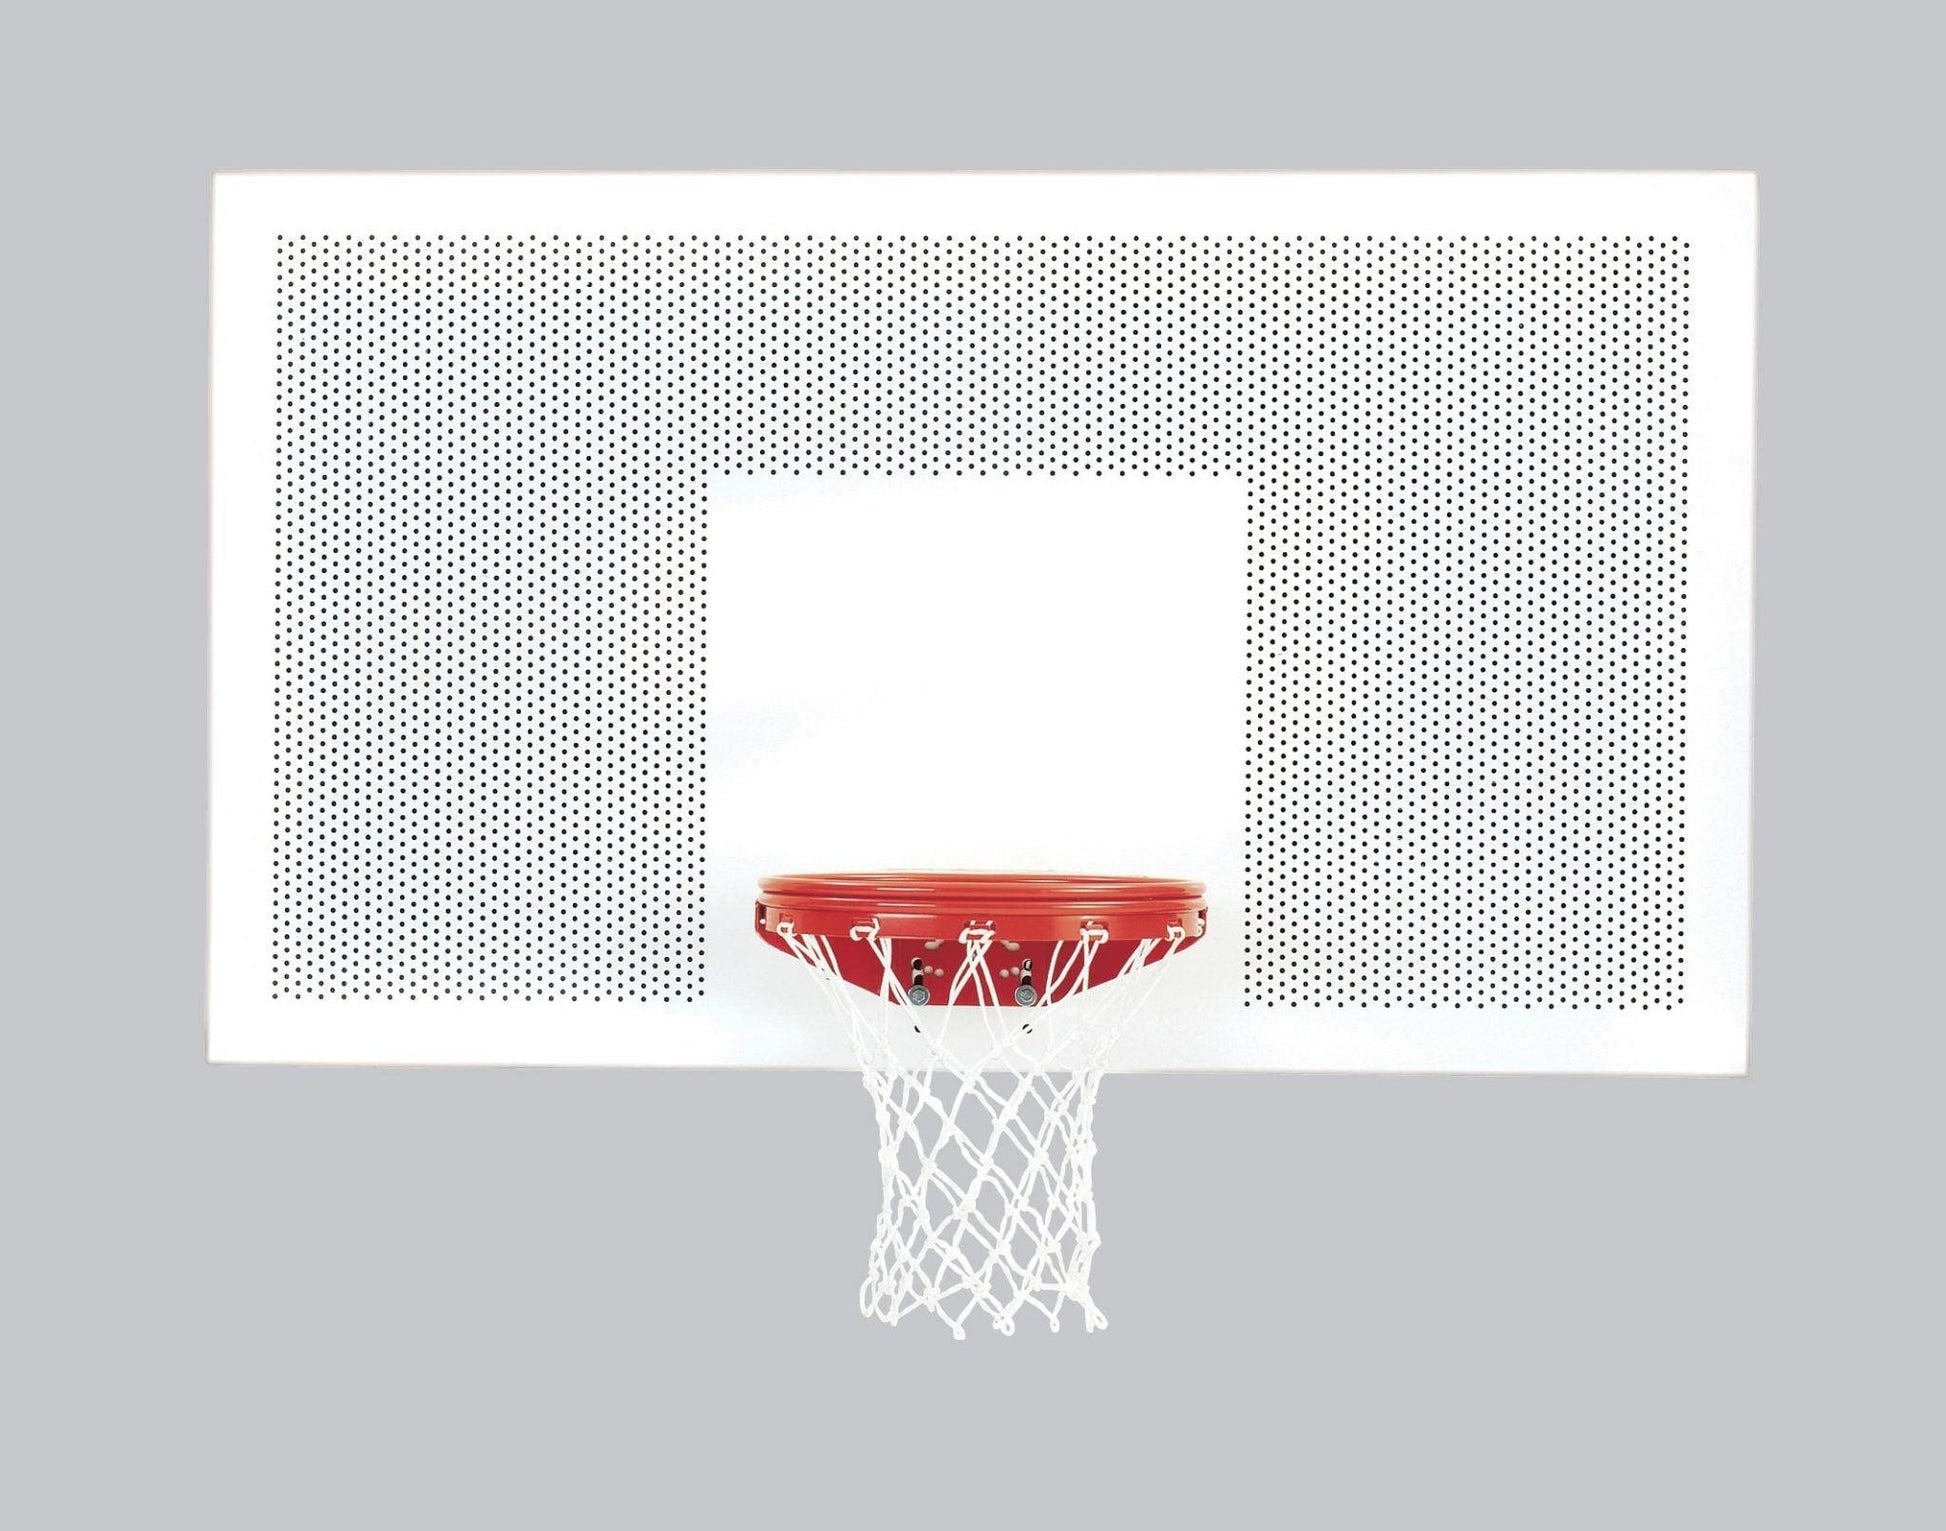 42" x 72" Perforated Steel Playground Backboard